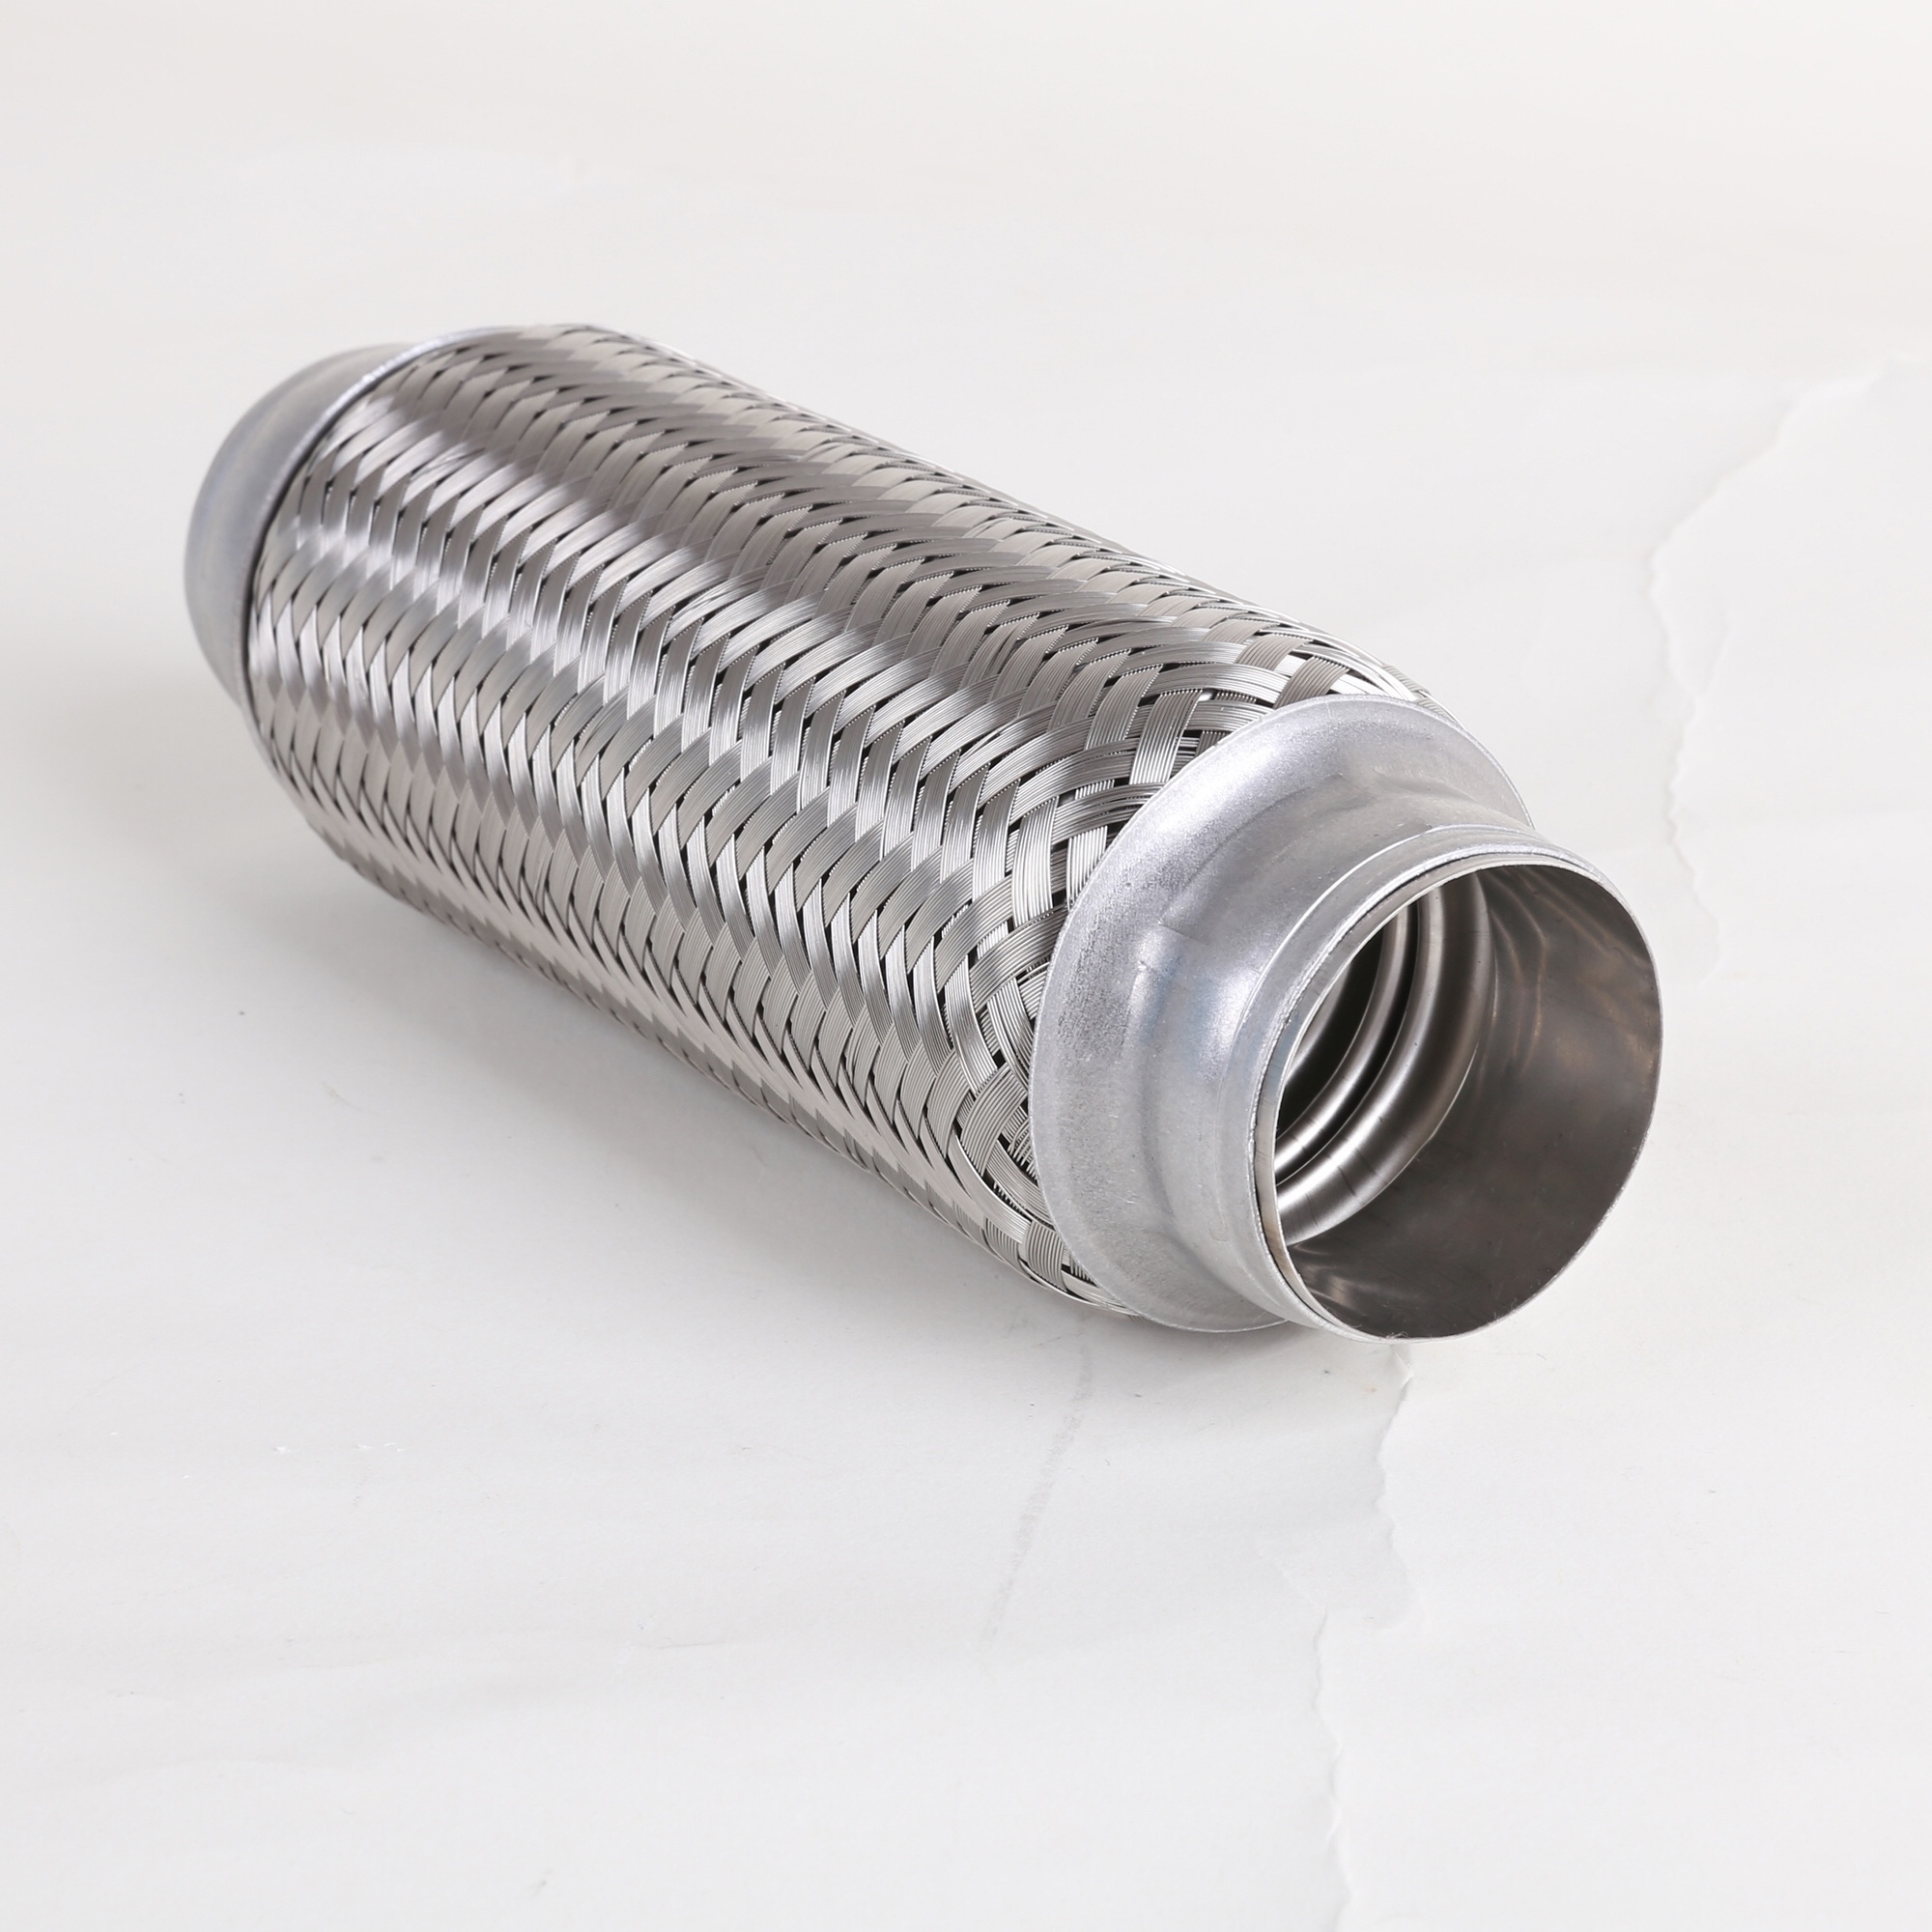 Stainless Steel Small Engine Flexible Exhaust Pipe for Generator